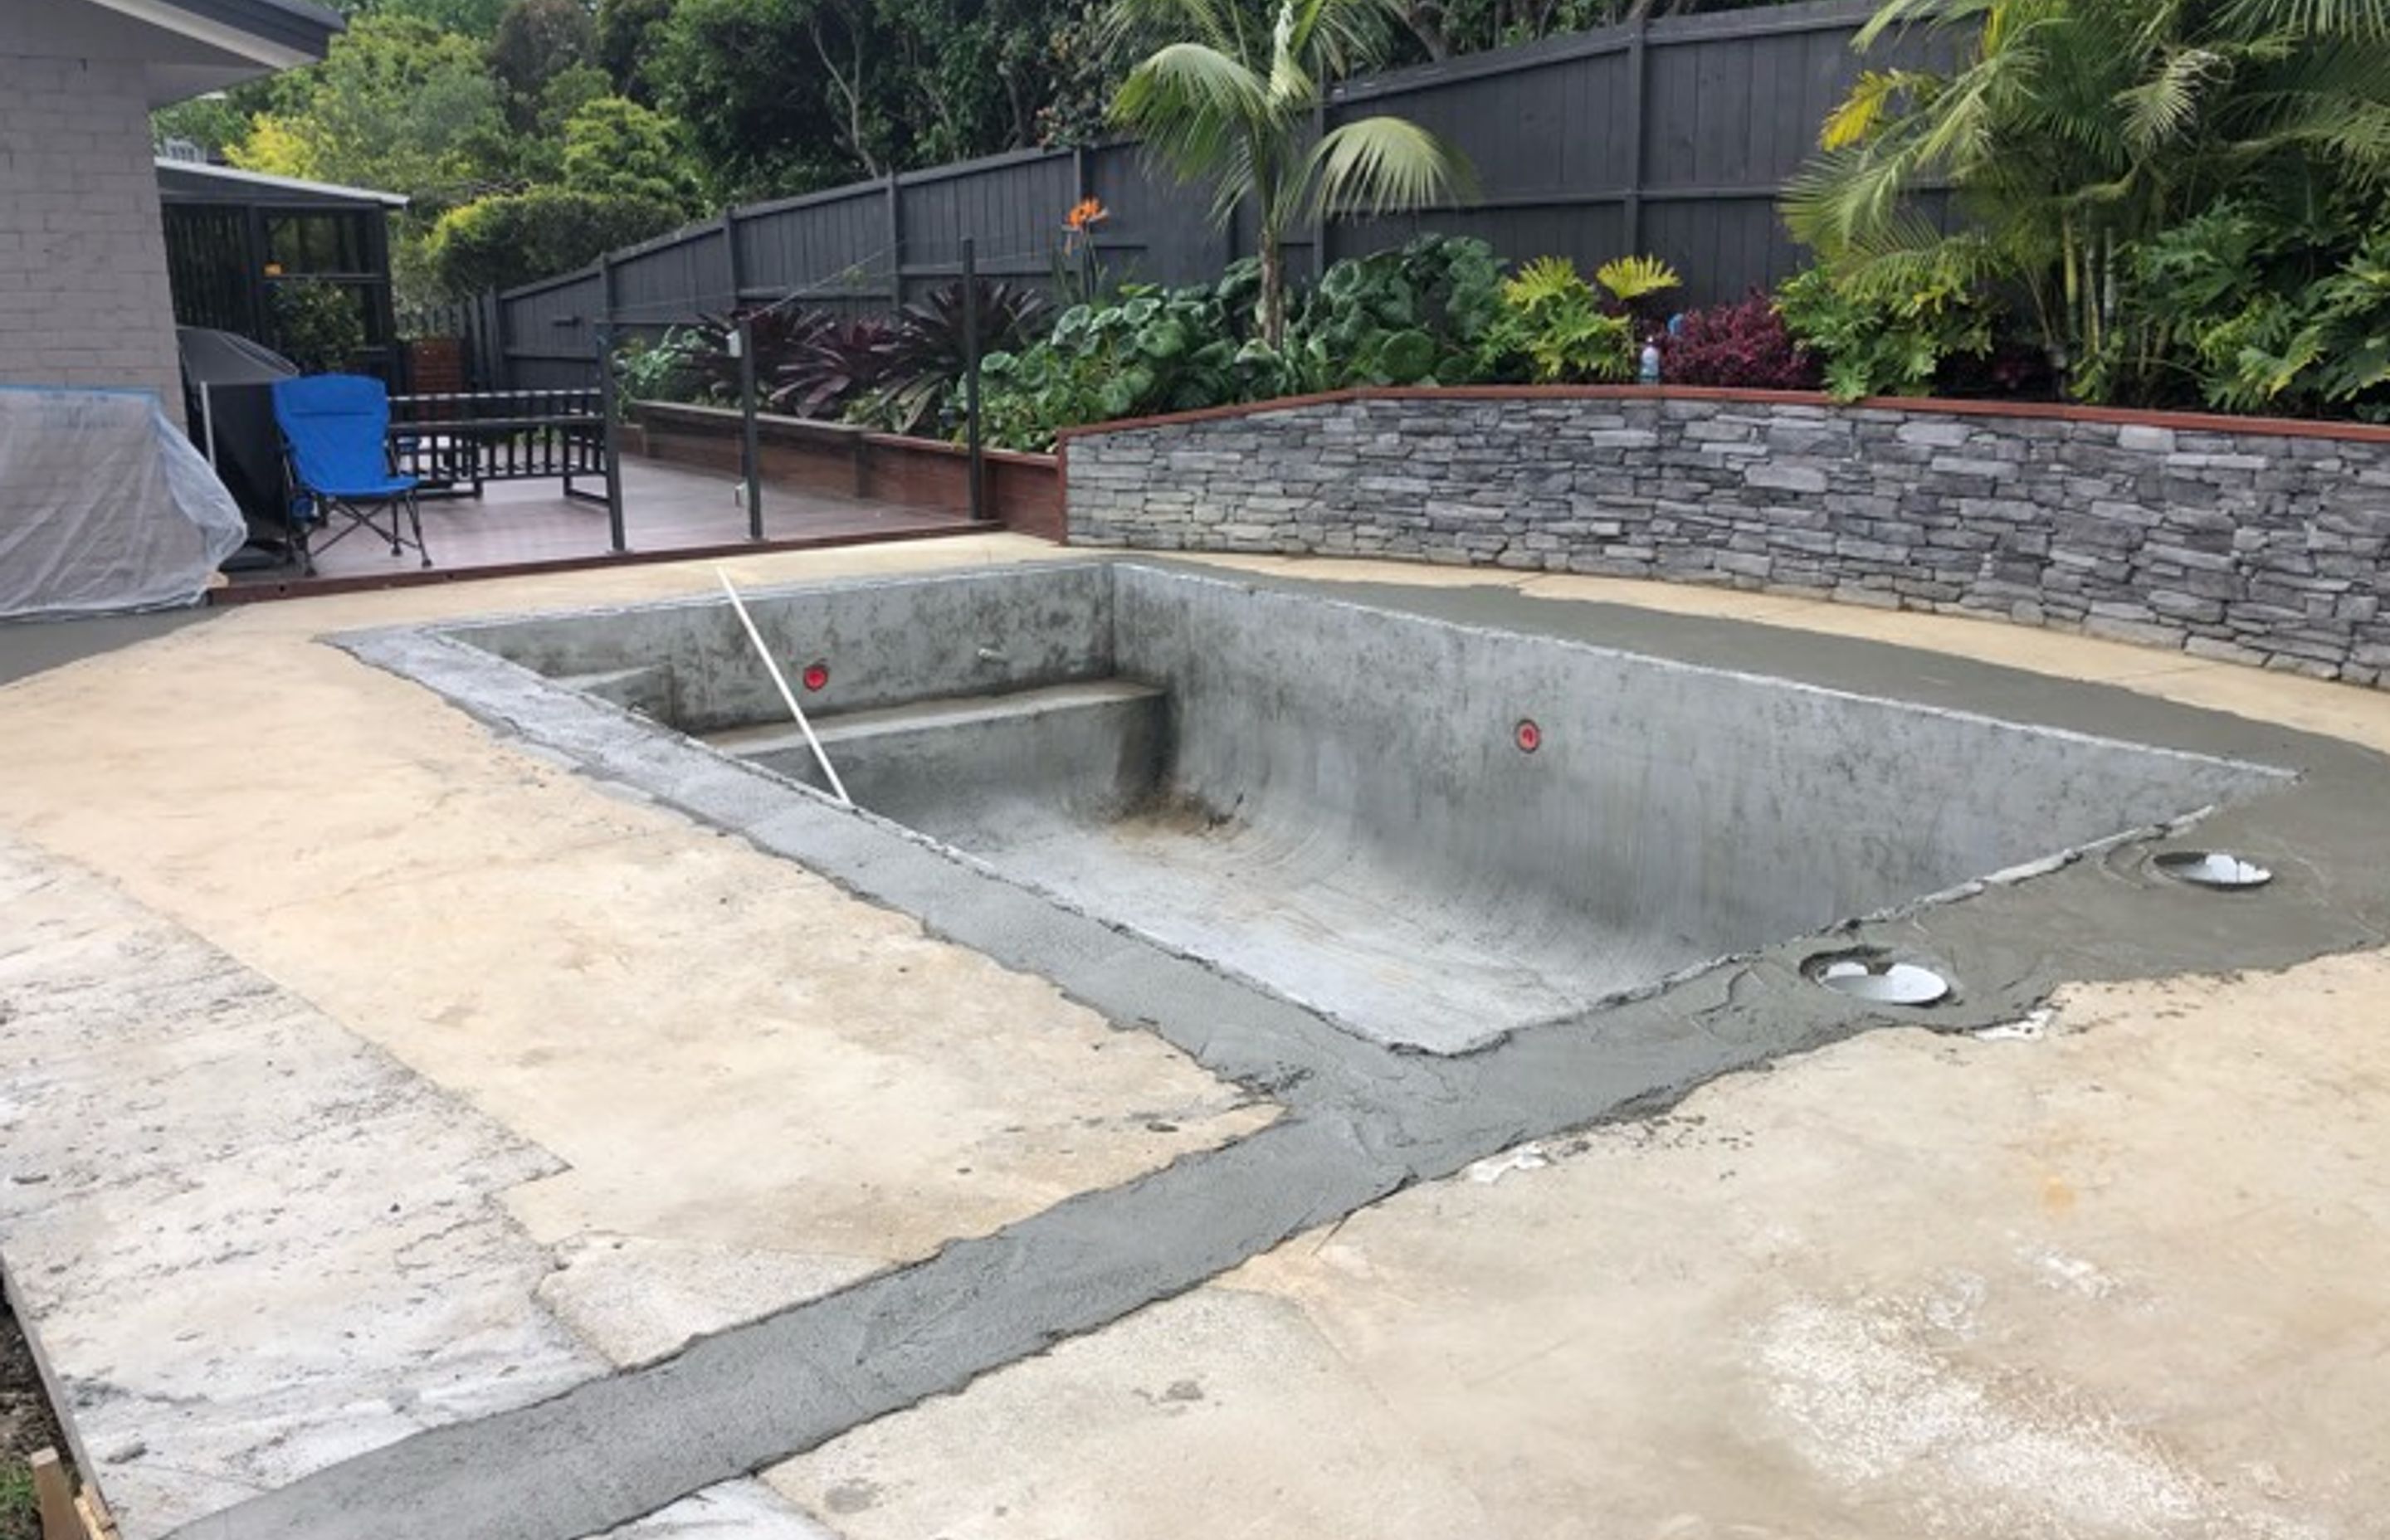 A newly sprayed concrete pool - ground plumbing newly installed and the old pool shape is visible that has had freshly filled with poured concrete.  The pool area can now be prepped for laying of new pavers &amp; coping and the cosmetic works can begin on the pool interior, including new pool plant installed.